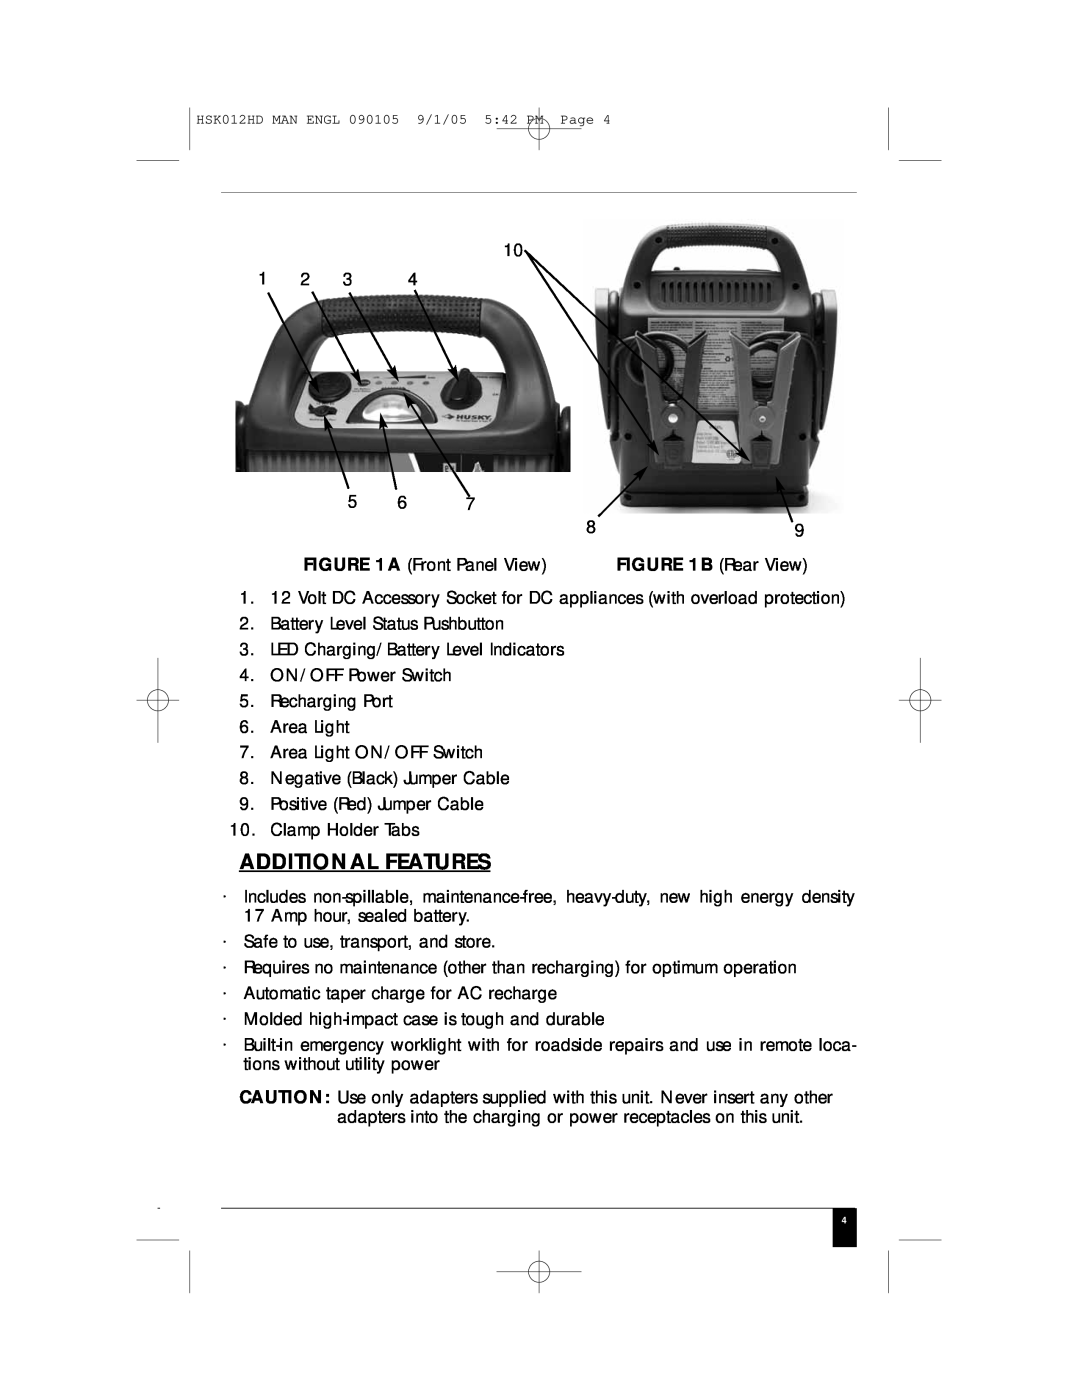 Husky HSK012HD manual Additional Features, A Front Panel View, B Rear View 